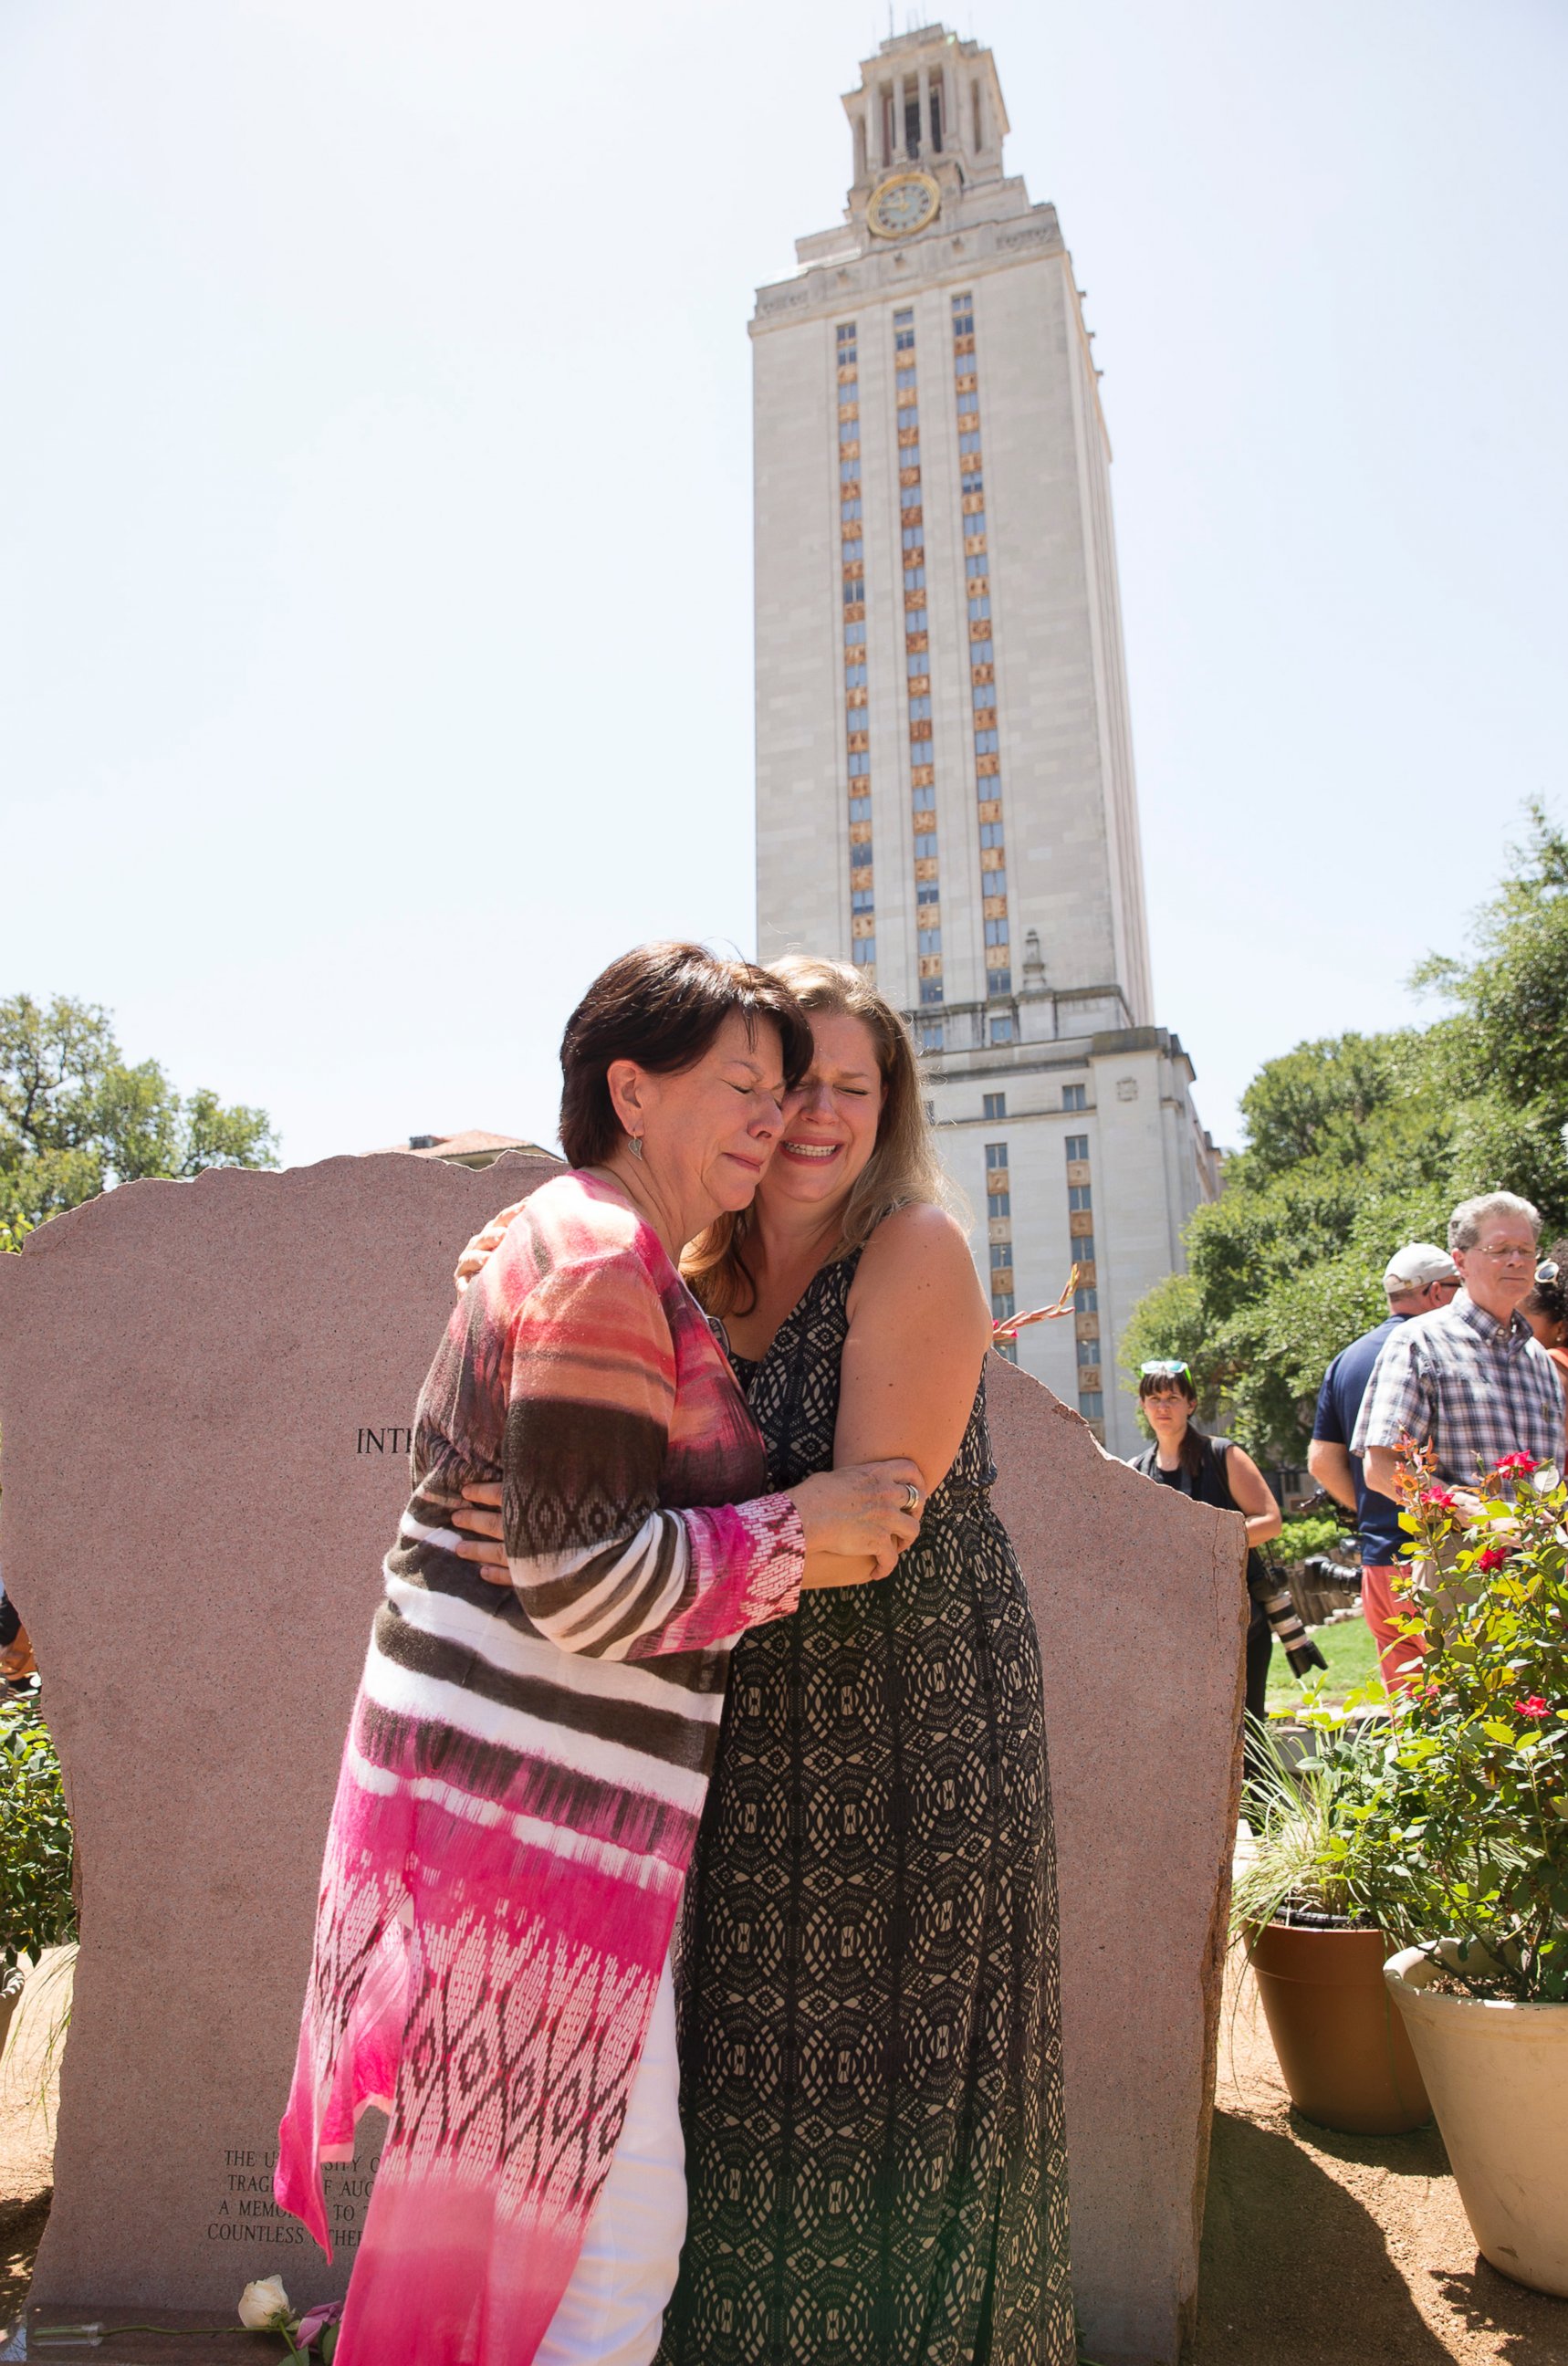 PHOTO: Pam Griffith Currie, left, with her daughter, Karen Currie Kanarek, at the memorial for the victims of the mass shooting in 1966 at the University of Texas at Austin, Aug. 1, 2016. Pam?'s sister, Karen Griffith, was killed in the shooting.